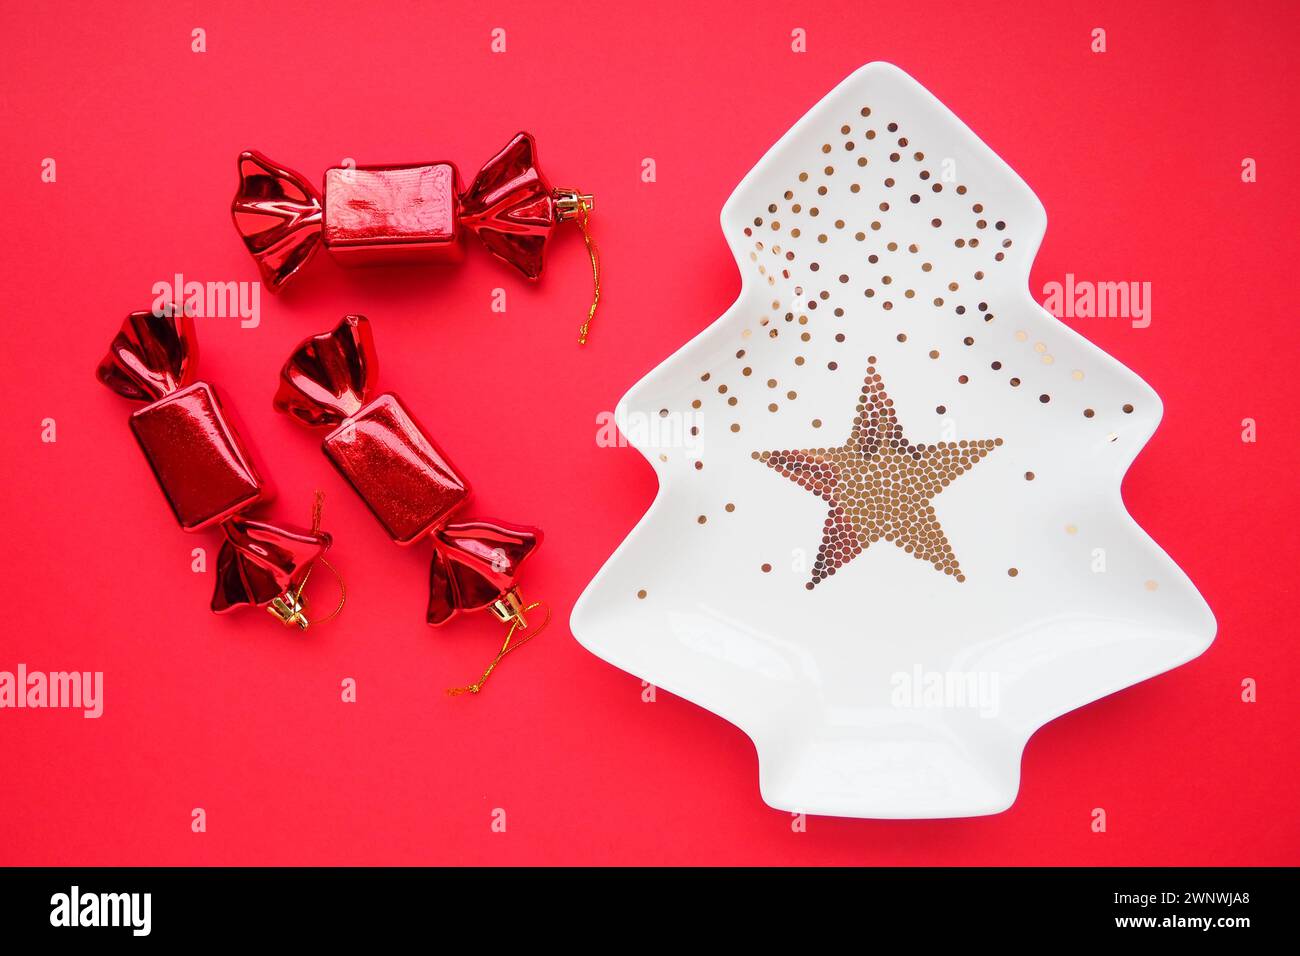 Christmas tree with gold ornaments and a star in the middle. Red background. Candy in a red shiny wrapper. Background for advertisements and Stock Photo